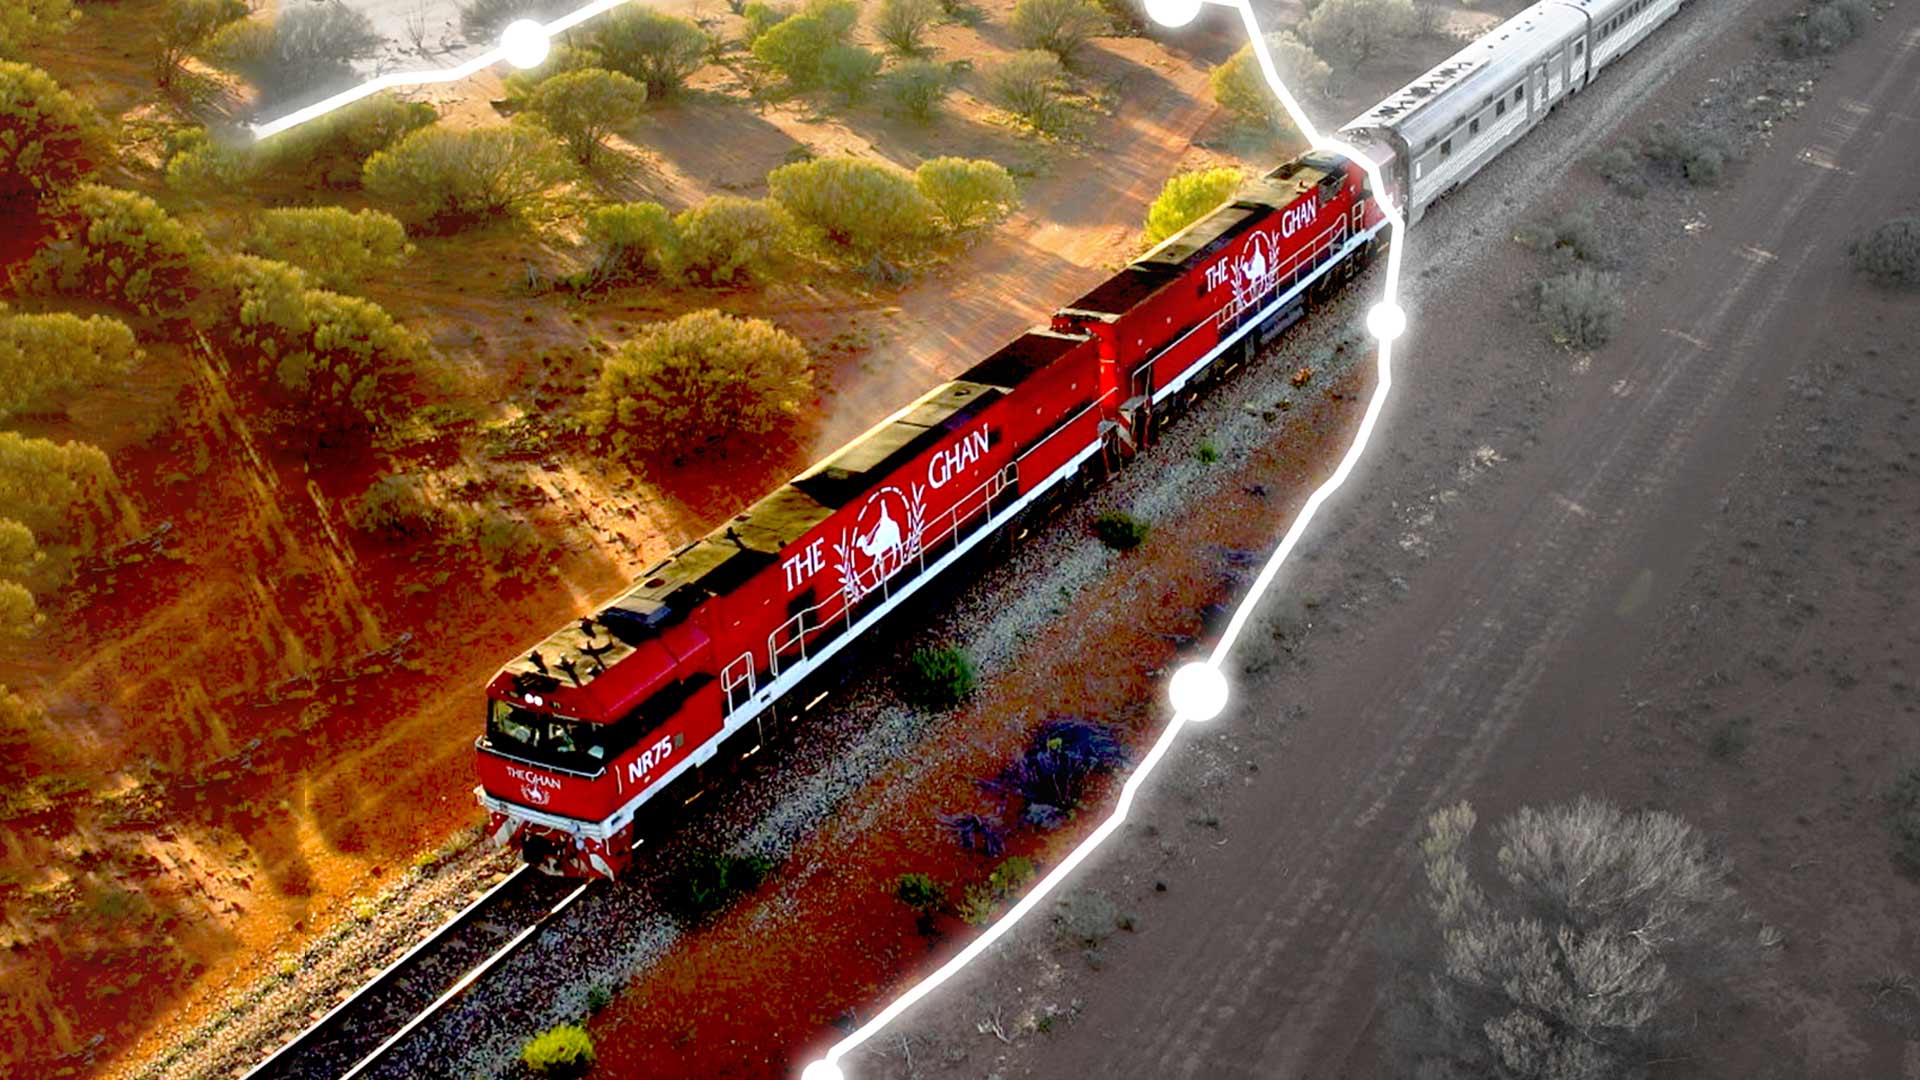 Watch World's Greatest Train Journeys from Above  Online on Disney+ South Africa